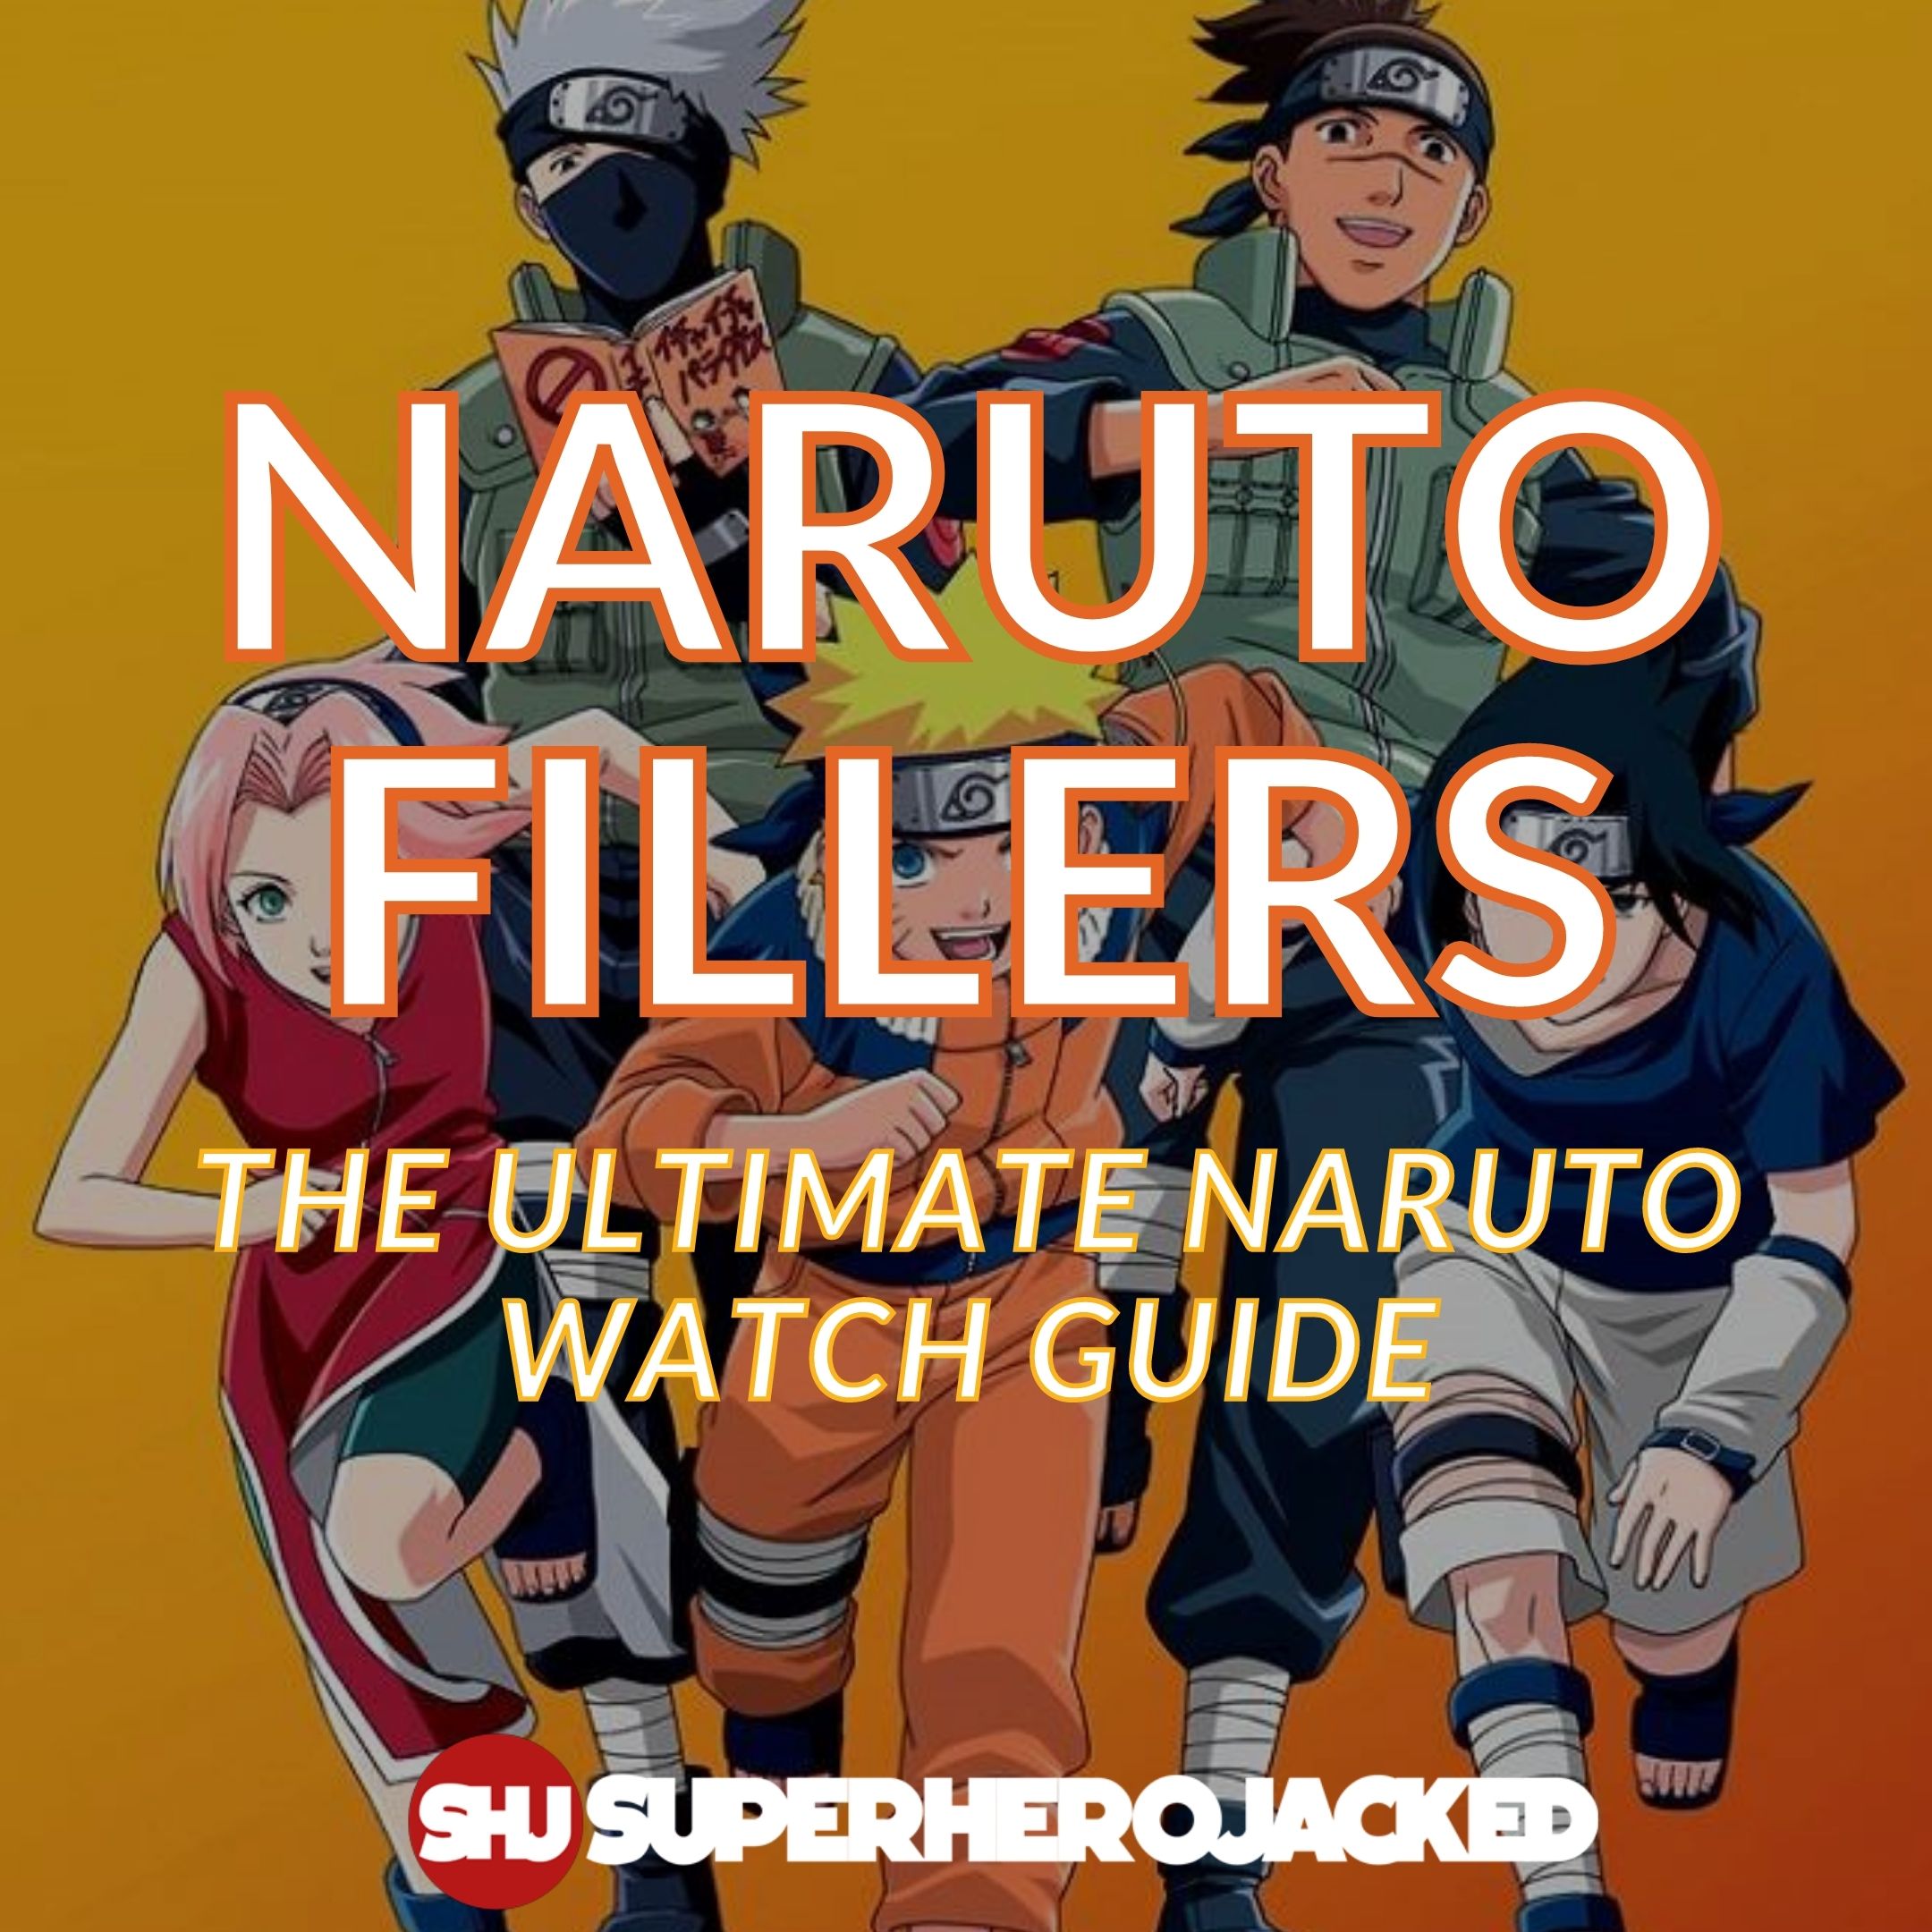 Where can I watch Naruto without fillers?